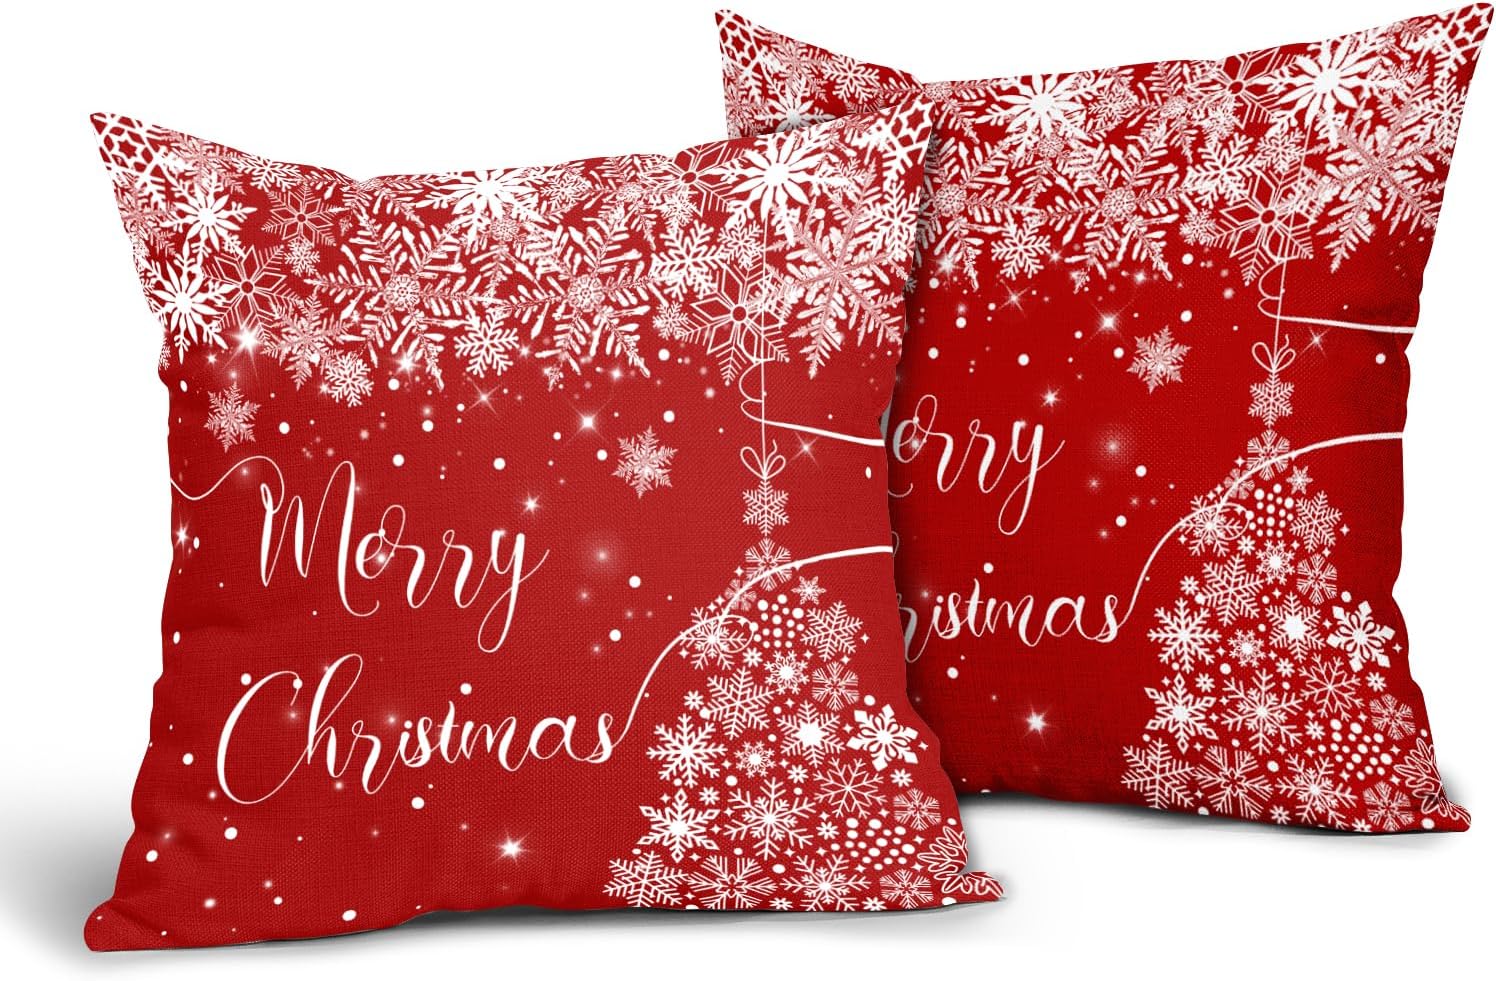 Christmas Throw Pillow Covers 18x18 Inch Set of 2 Red Winter Snowflakes Pillow Covers Merry Christmas Farmhouse Pillowscase Cotton Linen Square Cushion Covers for Sofa Couch Bedroom Home Decoration